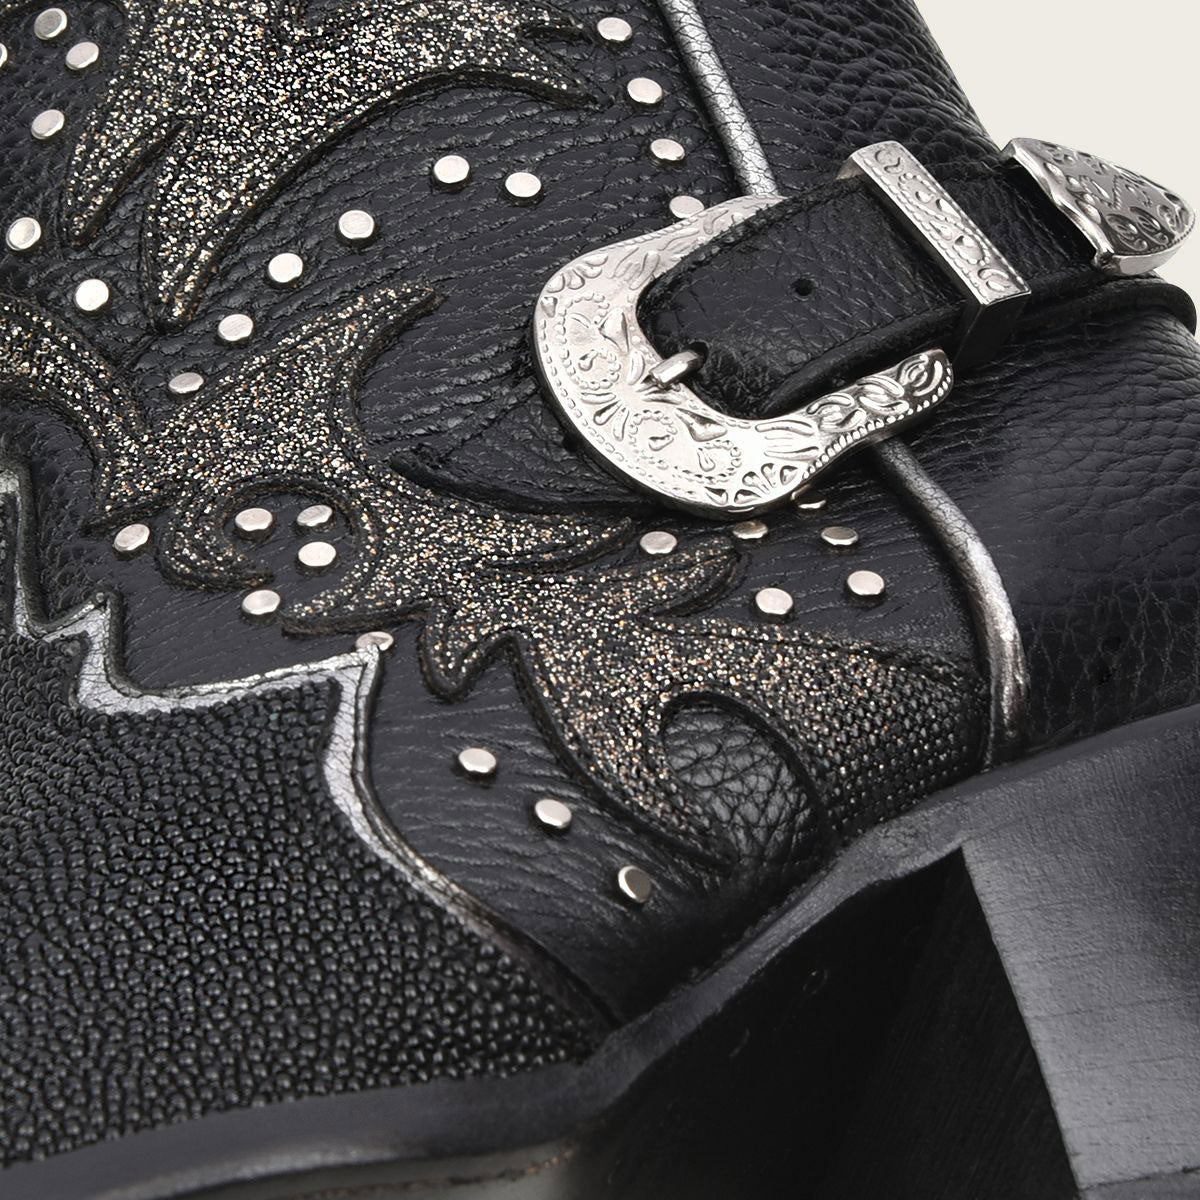 The metallic studs and leather appliqués add edgy glamour to these boots, enhanced by their shiny finish